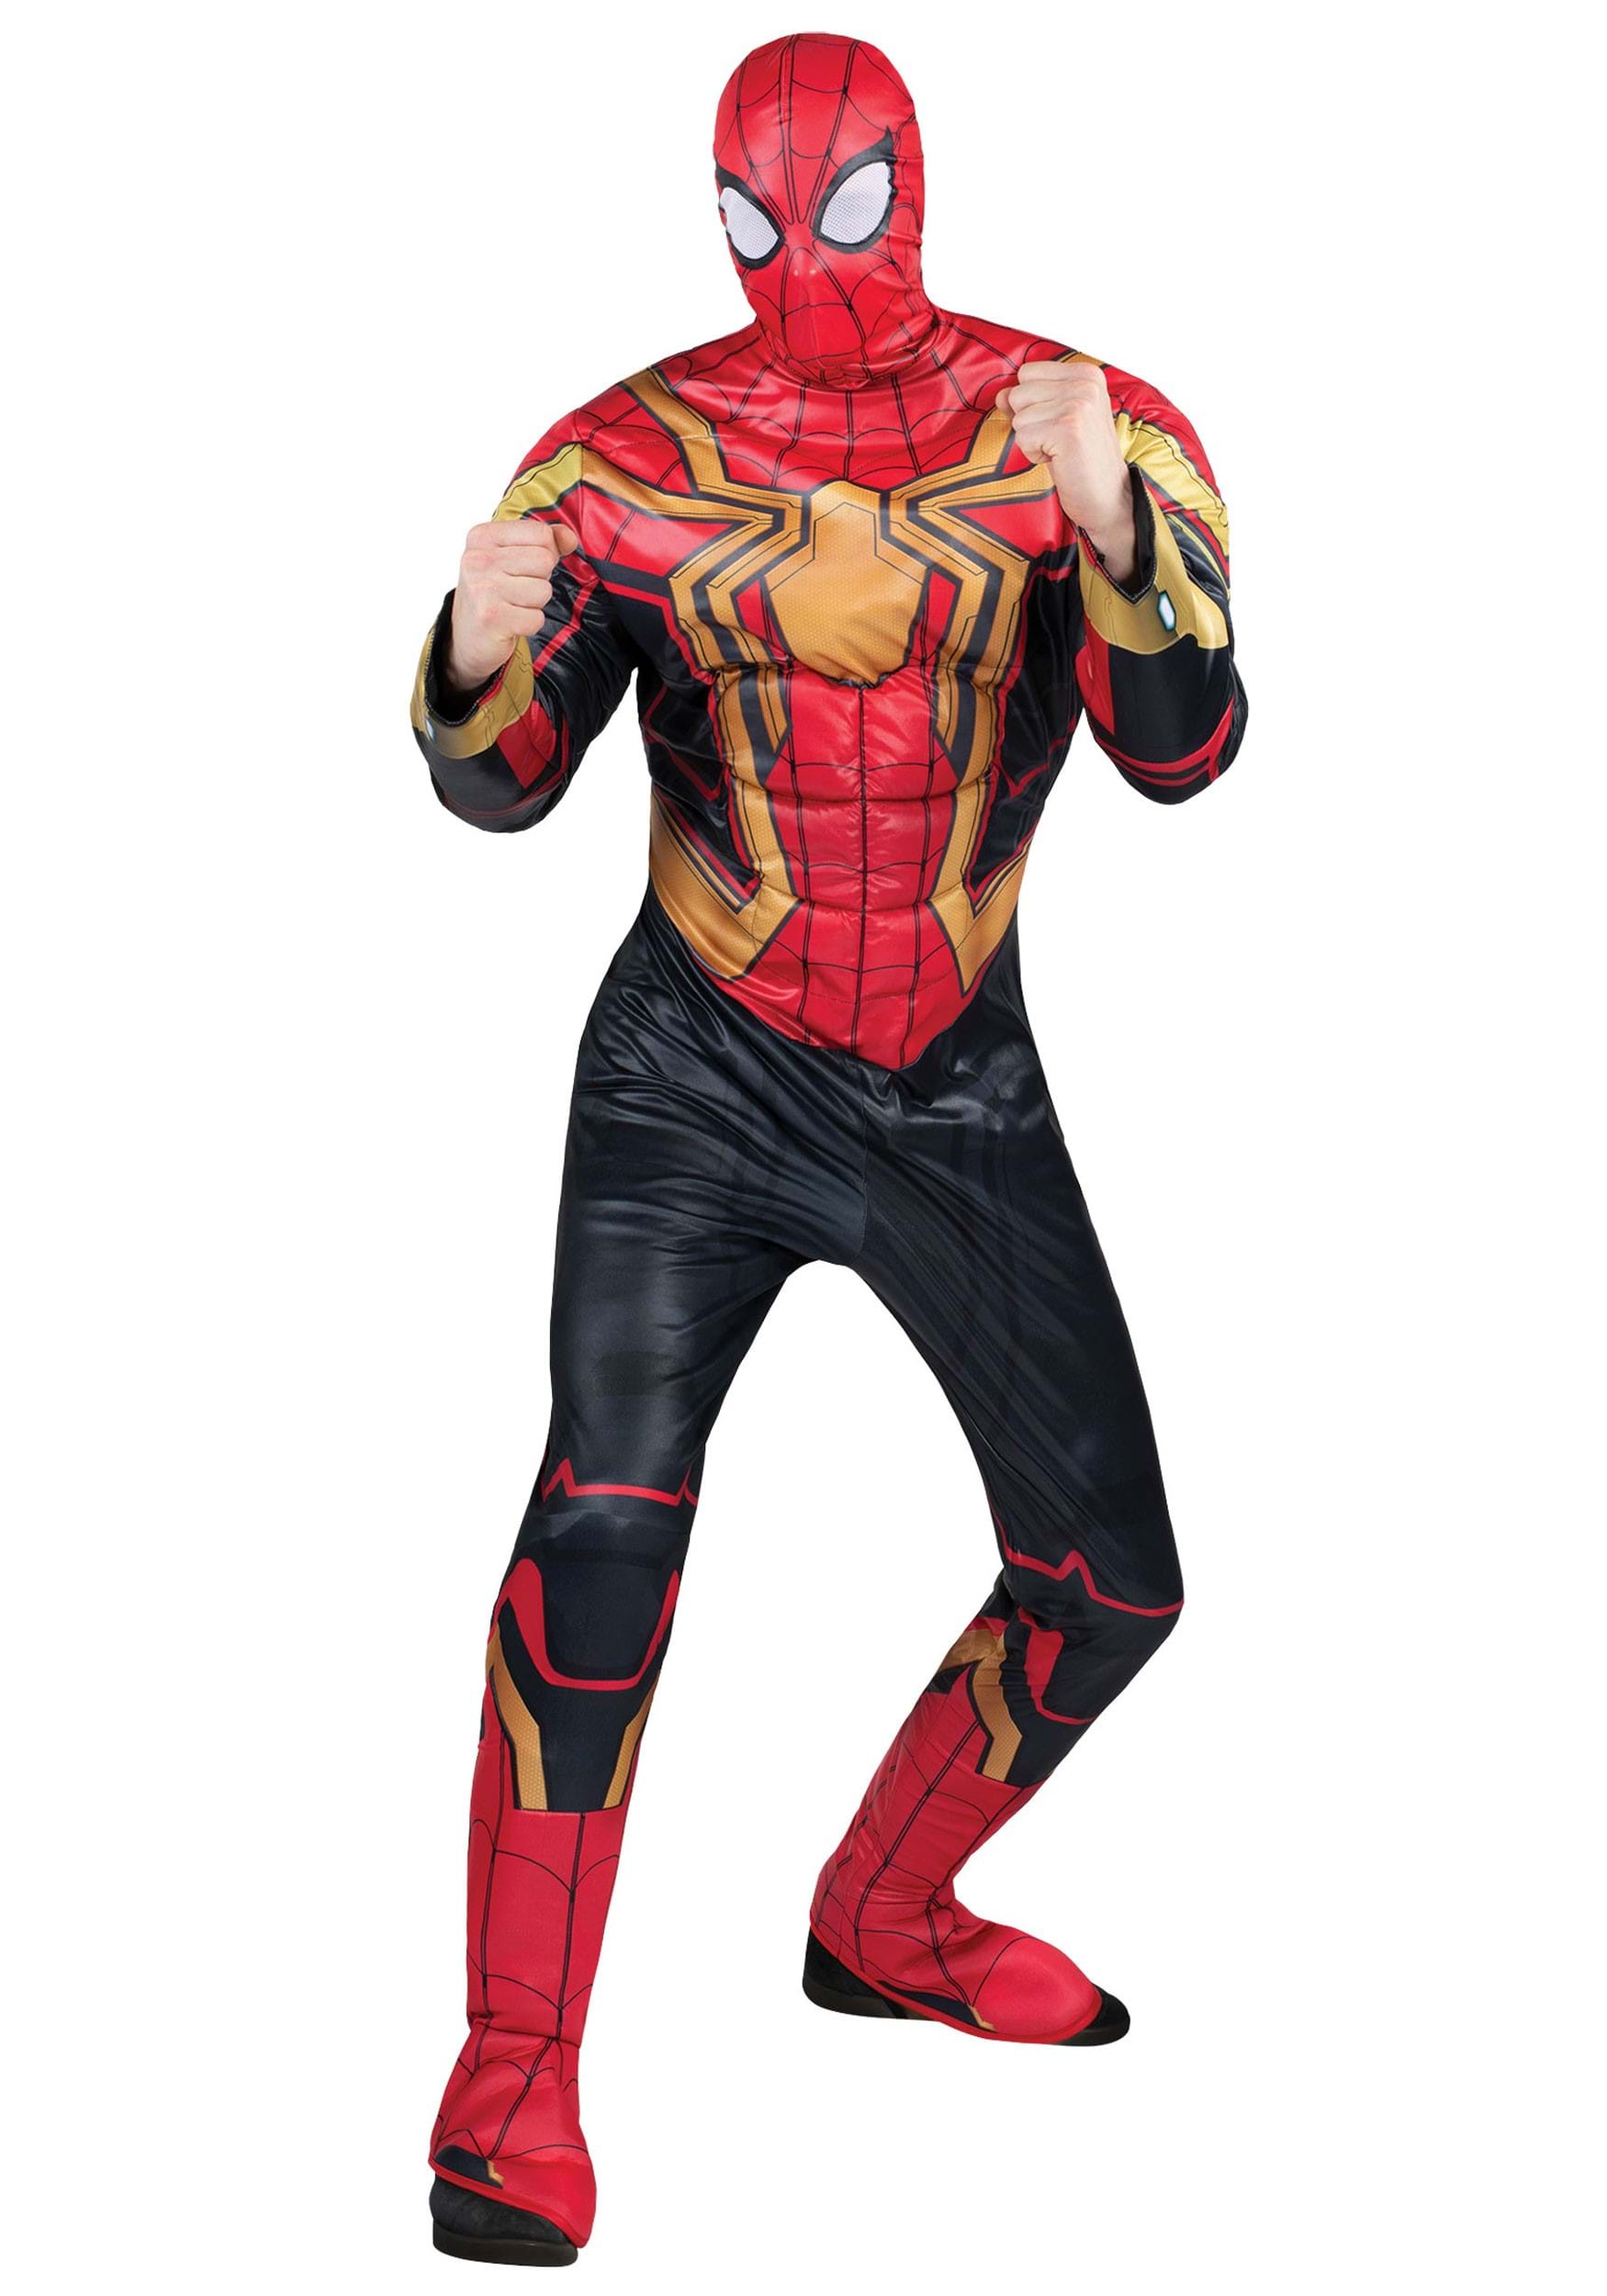 Image of Integrated Suit Spider-Man Adult Costume | Marvel Costumes ID JWC0923-M